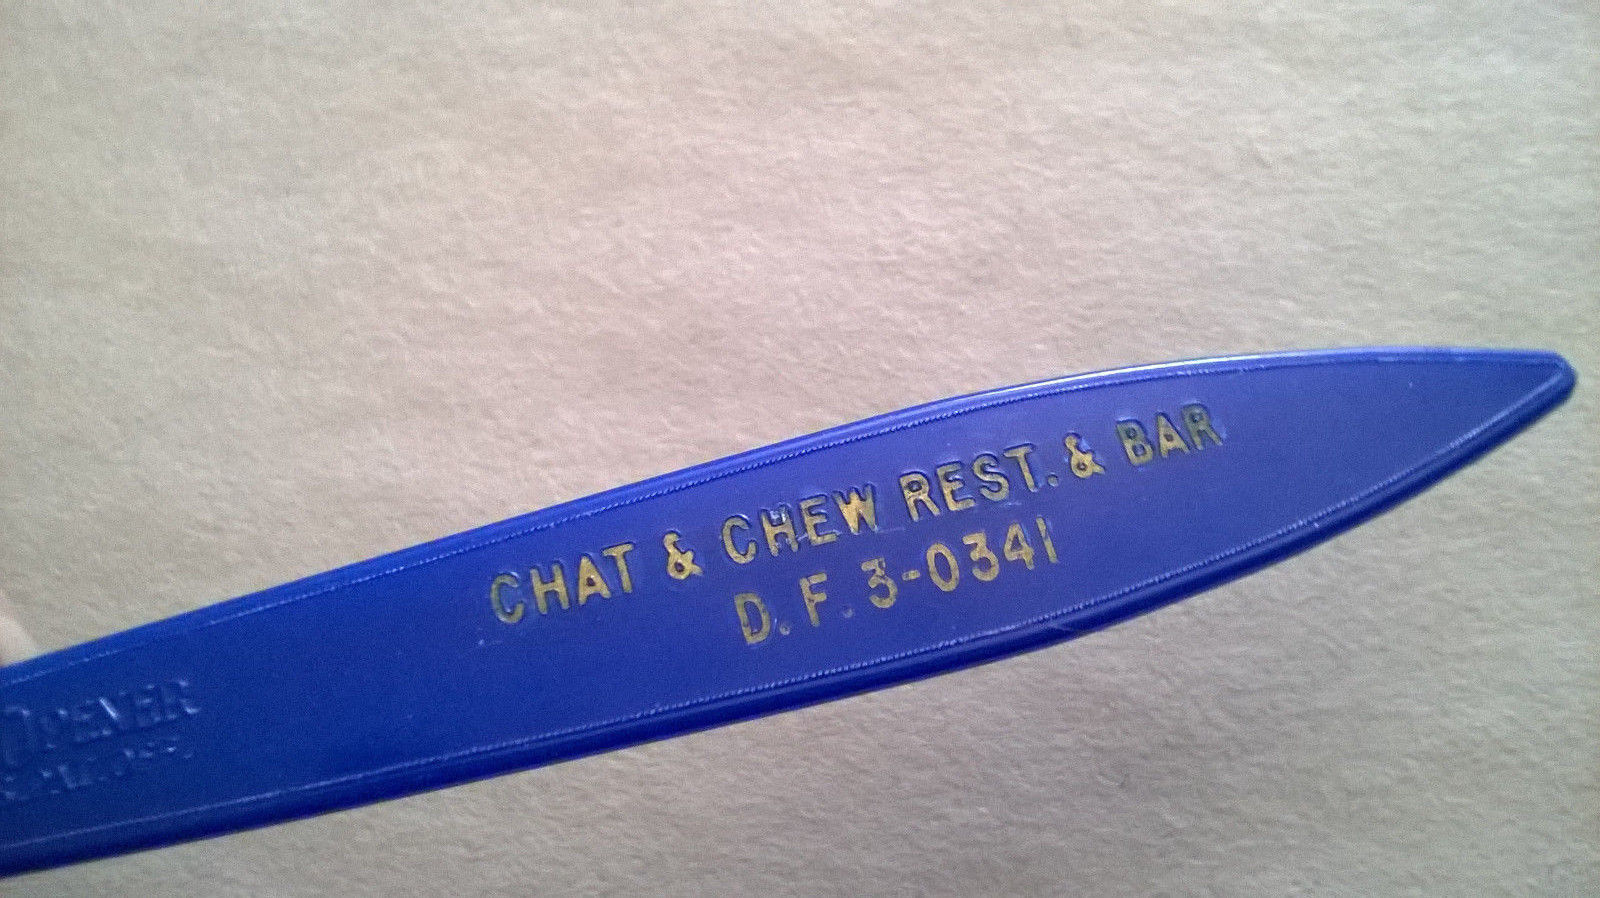 Primary image for Chat & Chew Restaurant Bar Plastic Letter Opener 5 digit phone # NO Location 